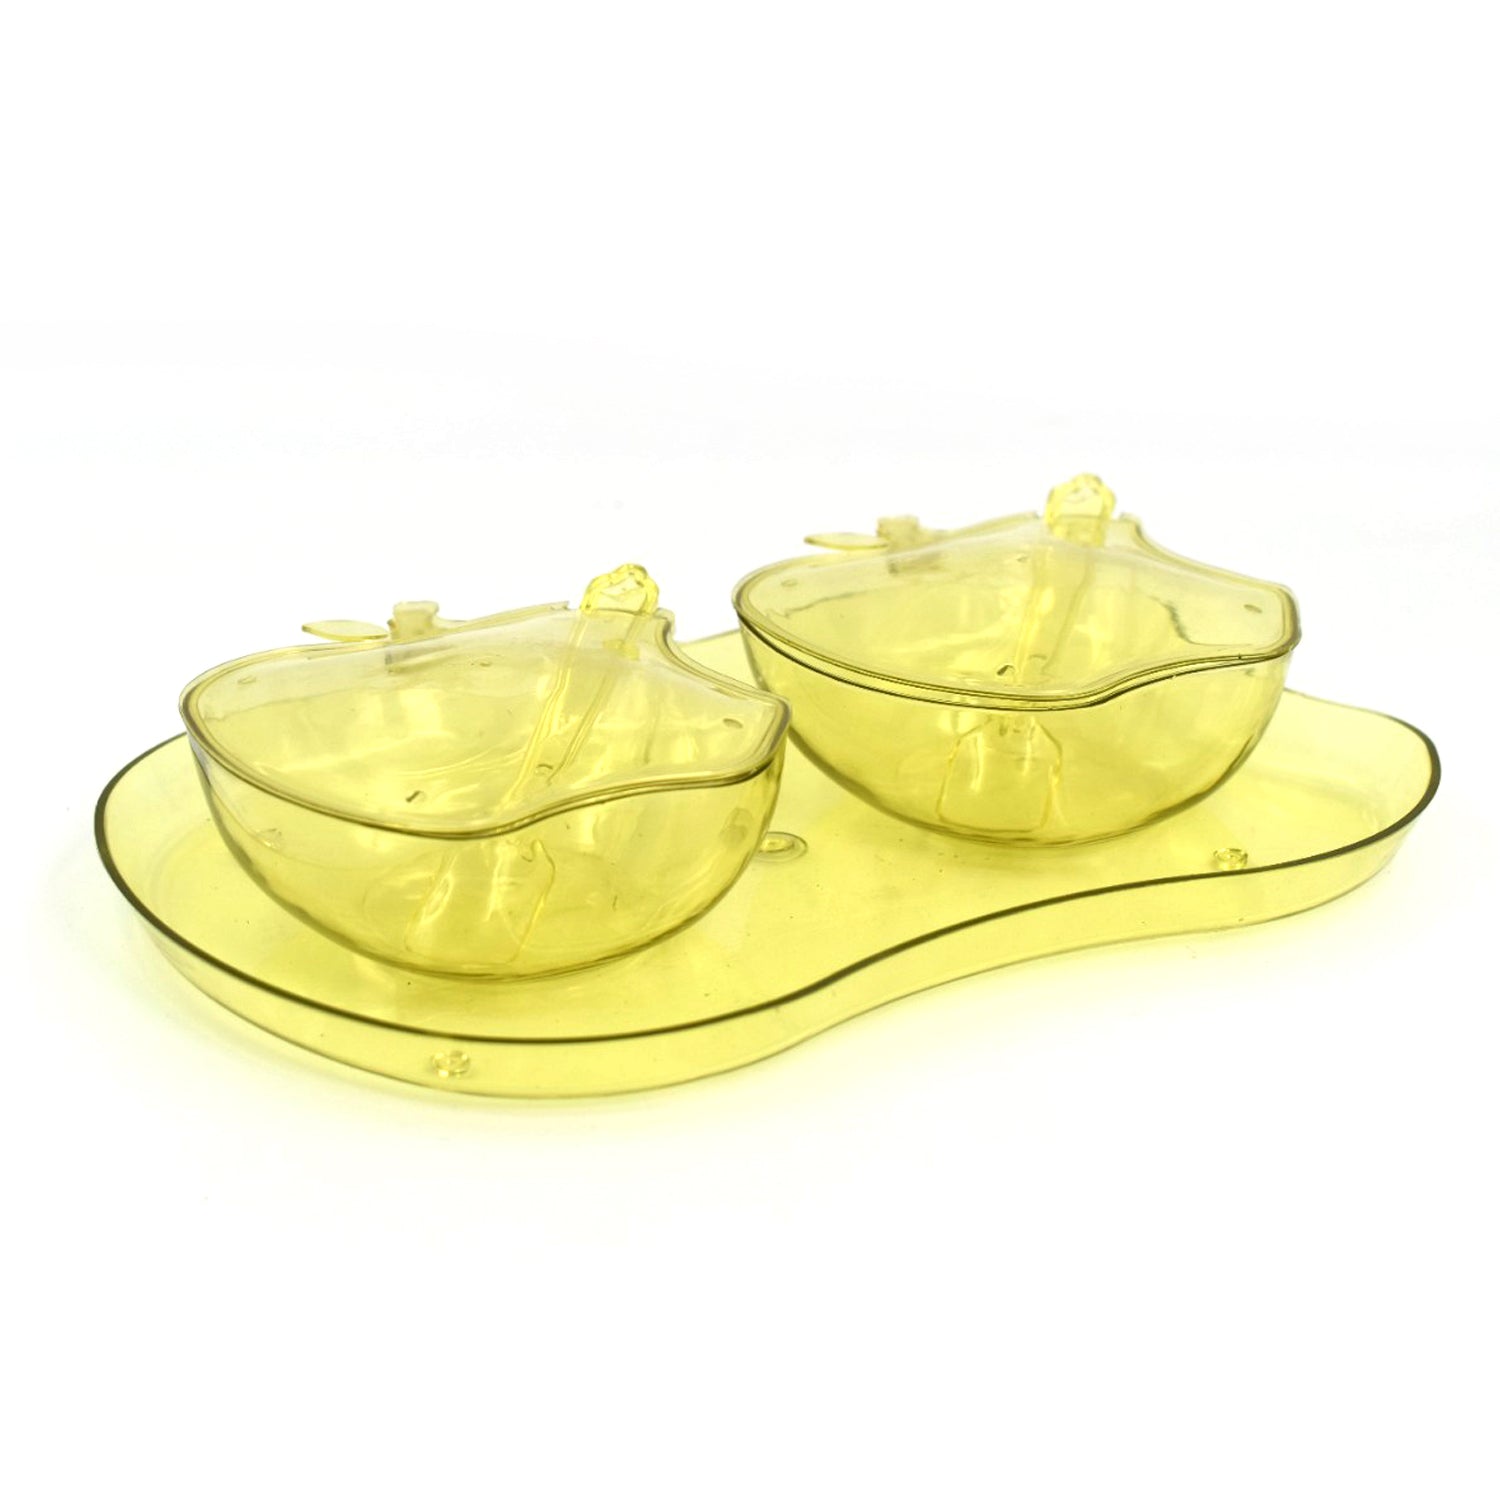 2752 Apple Shape Tray Bowl Used For Serving Snacks And Various Food Stuffs. DeoDap